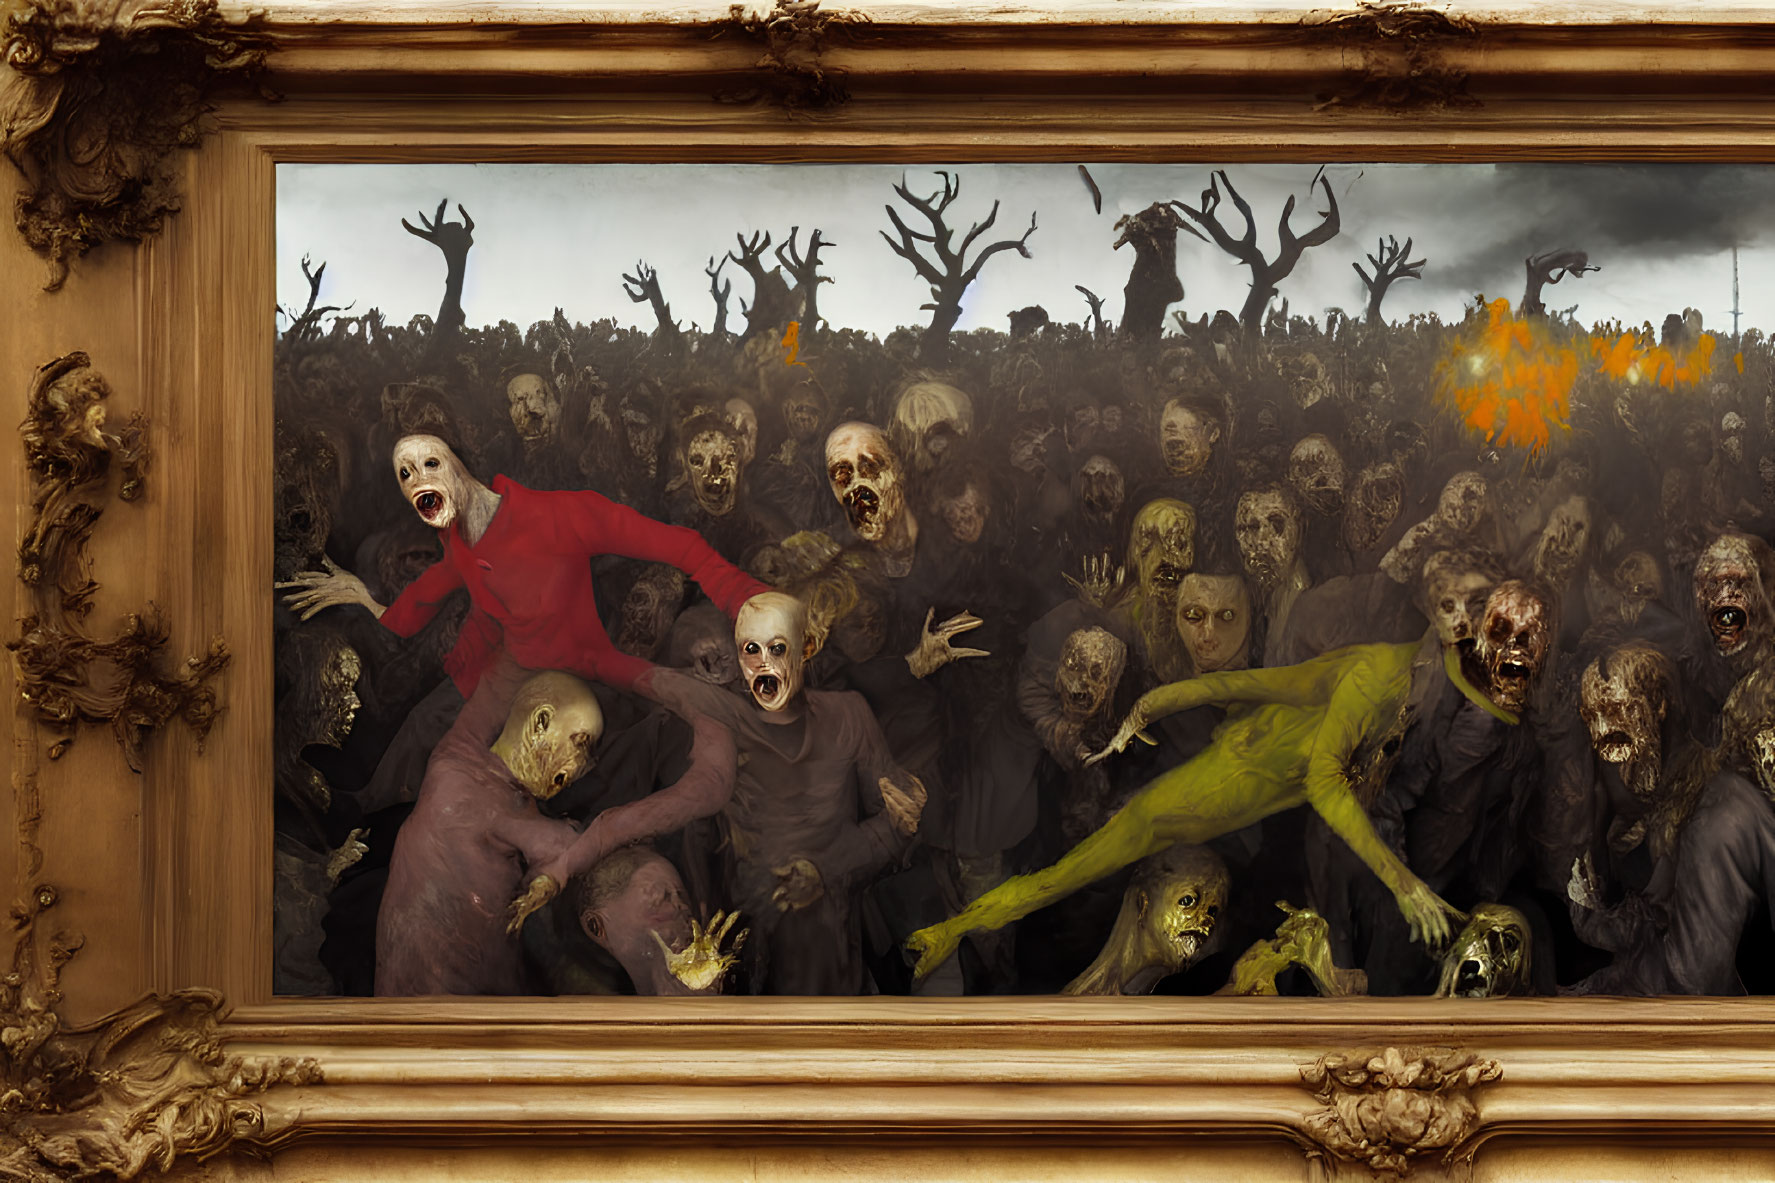 Horde of zombies emerge from fiery, chilling painting